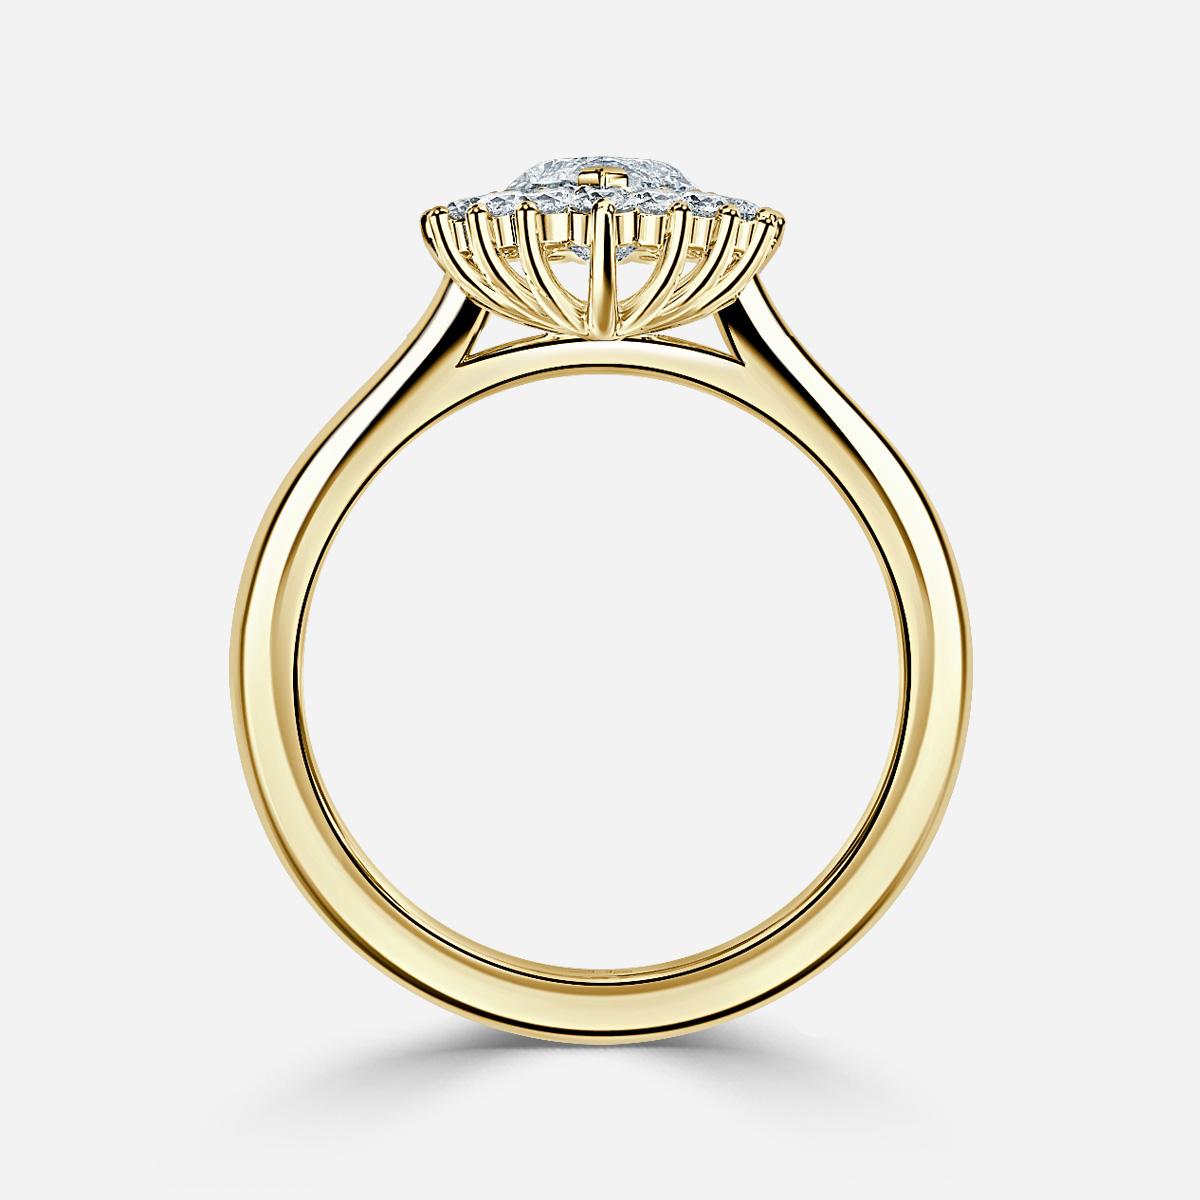 Windermere Yellow Gold Cluster Engagement Ring